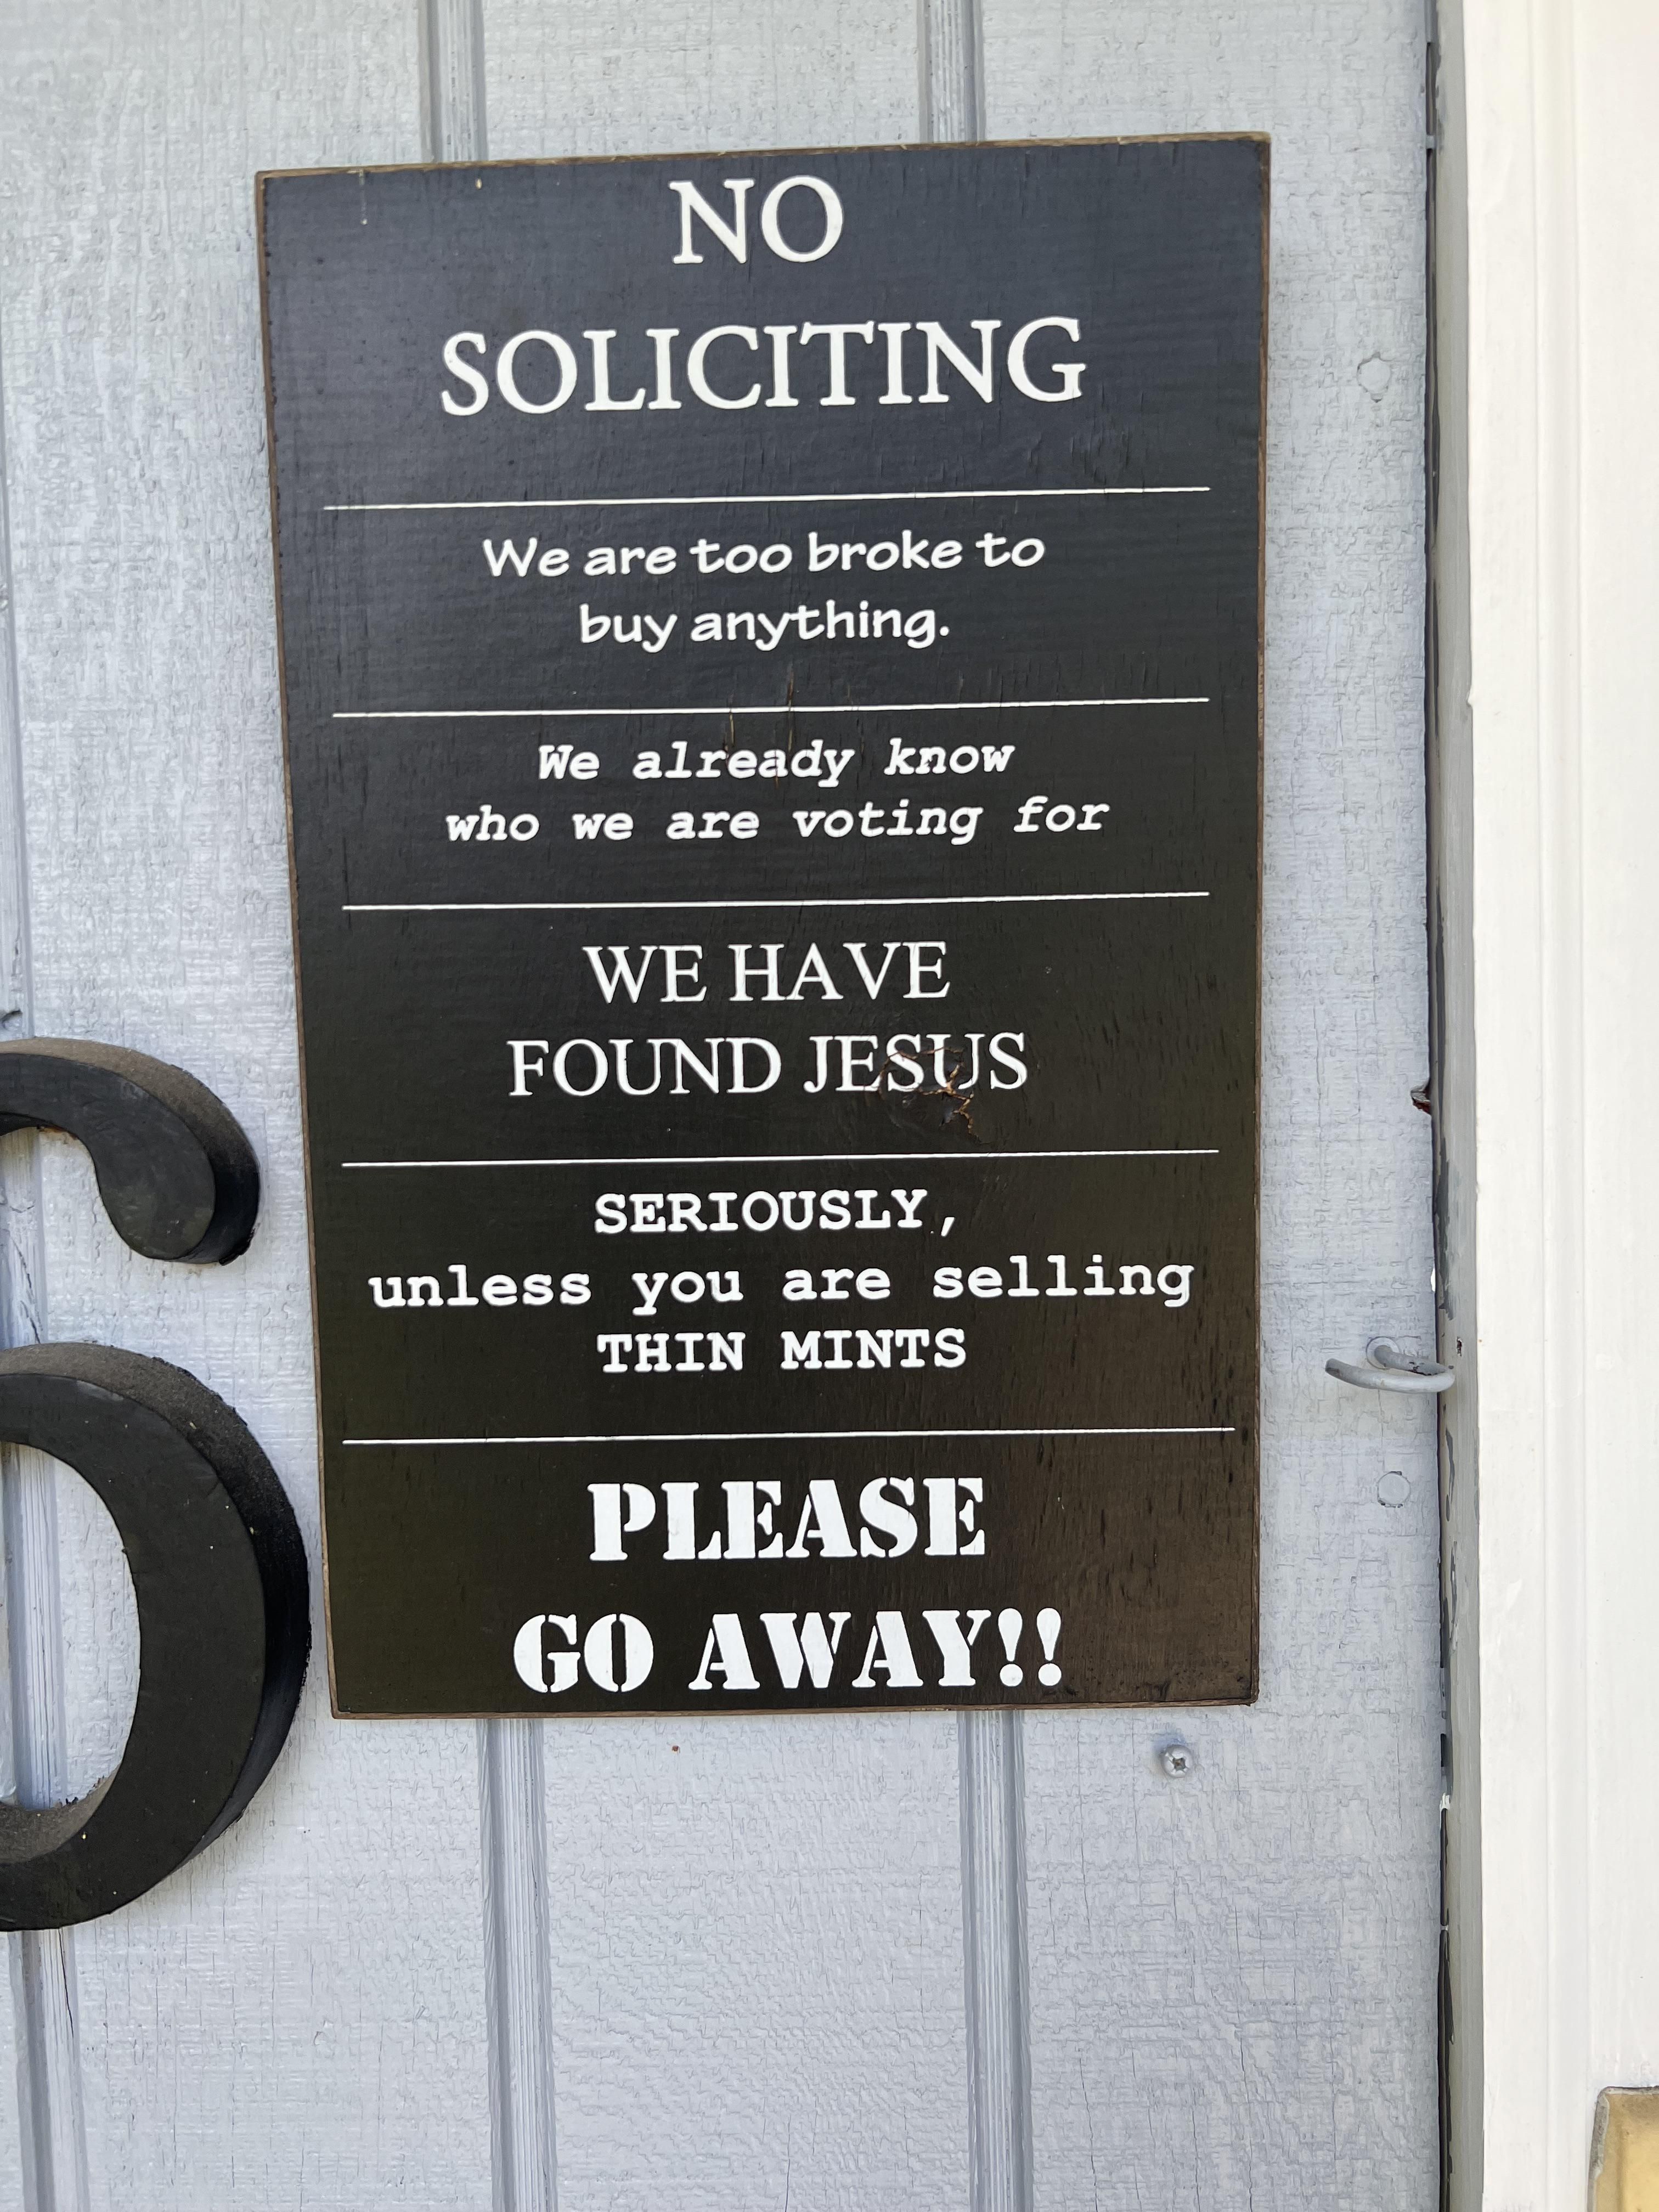 My Grandmother’s “No Soliciting” sign.